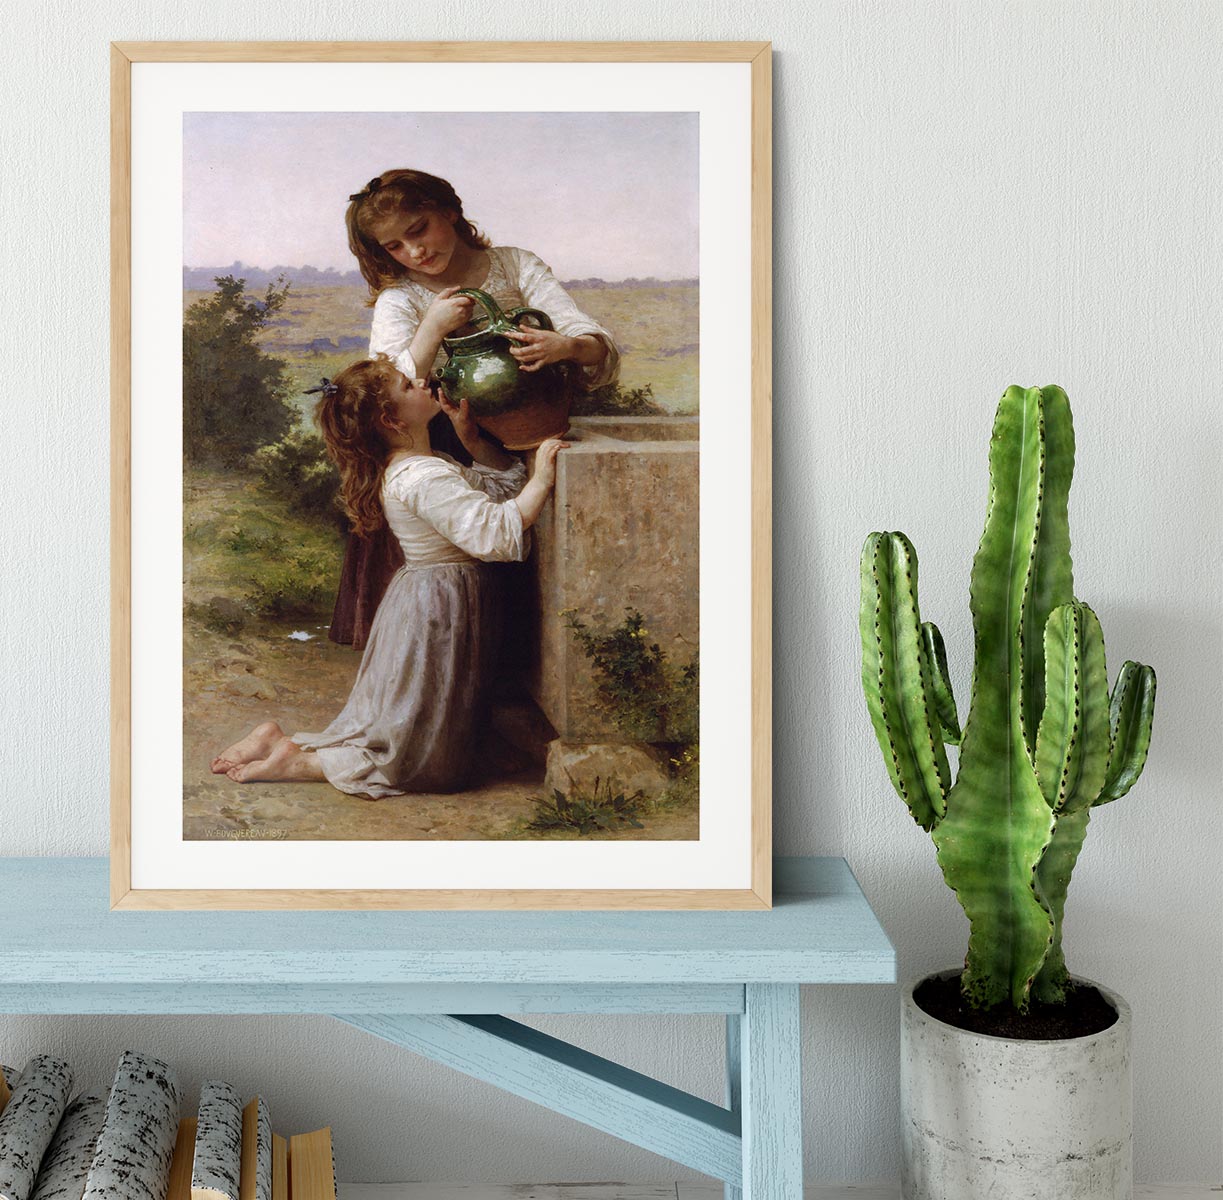 At The Fountain 2 By Bouguereau Framed Print - Canvas Art Rocks - 3